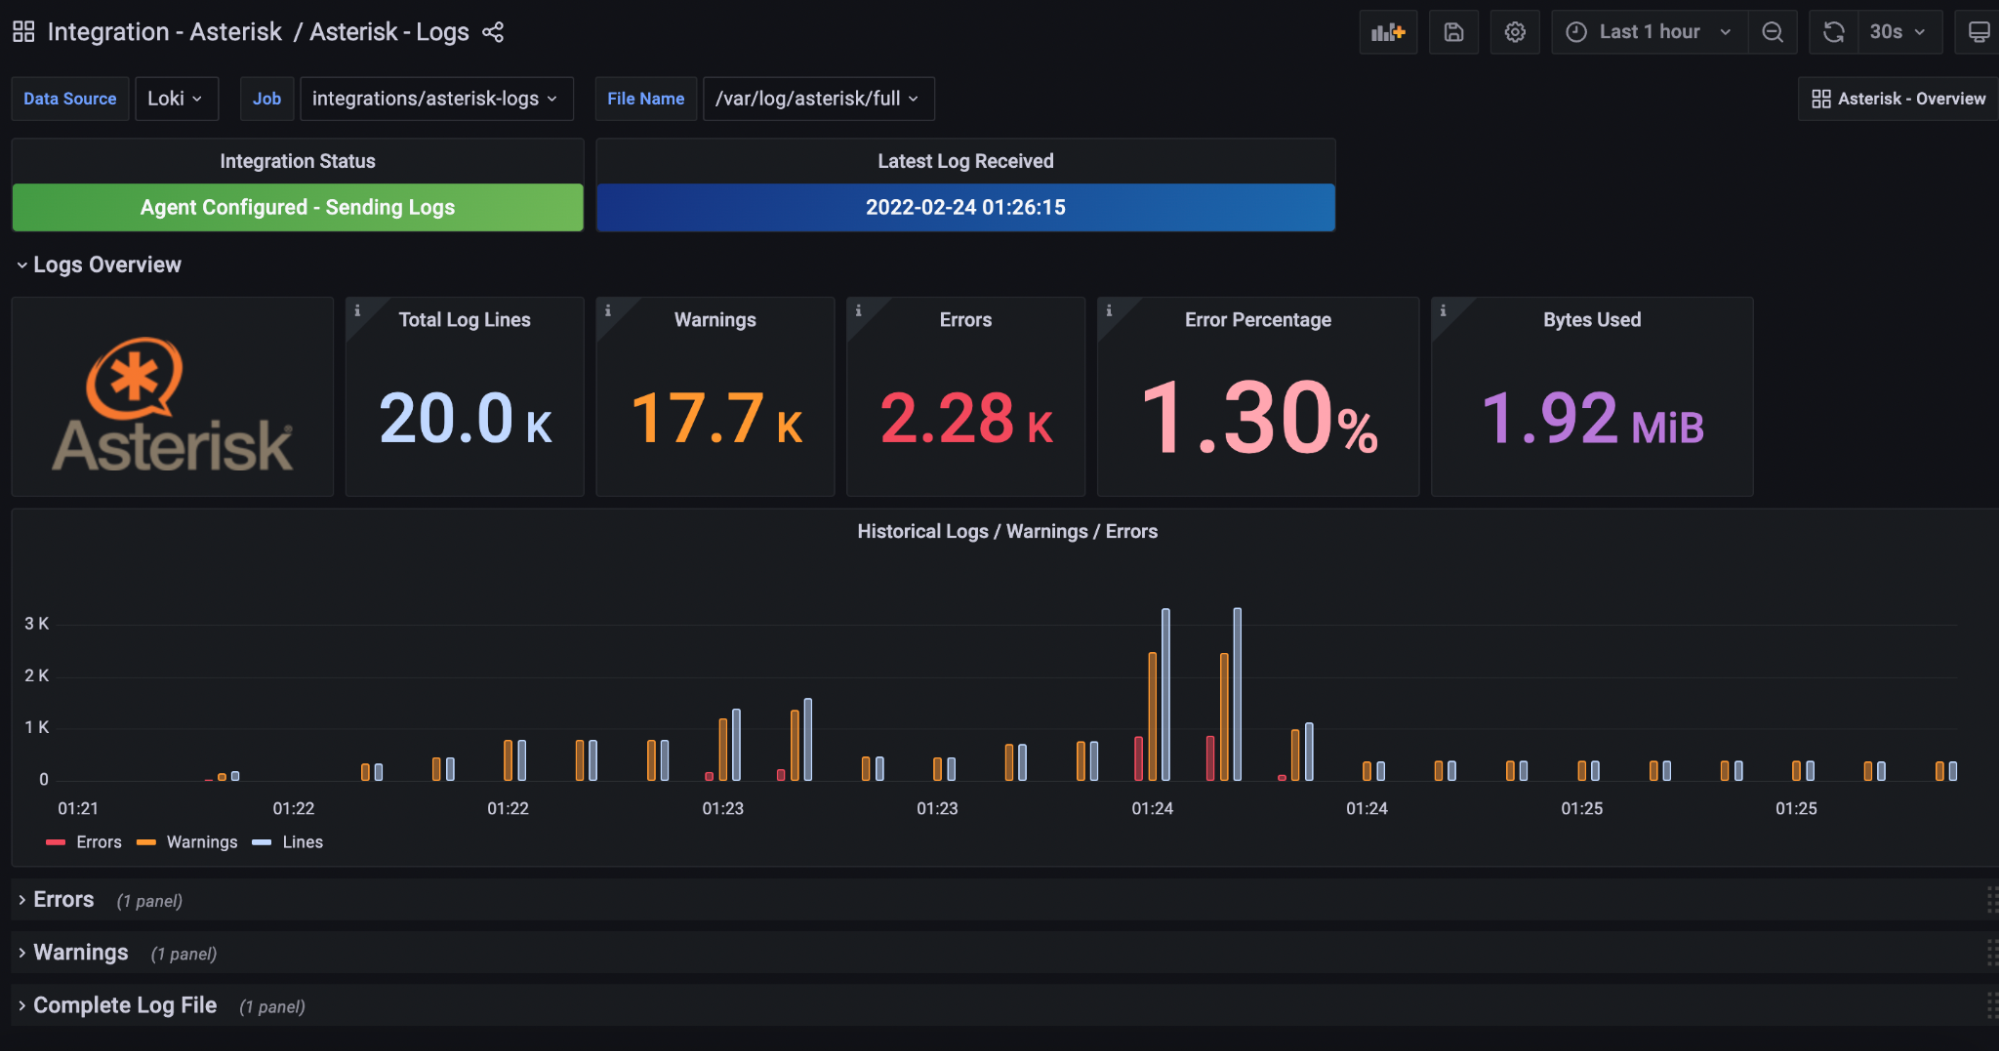 Pre-configured dashboard for Asterisk logs in the Asterisk integration for Grafana Cloud